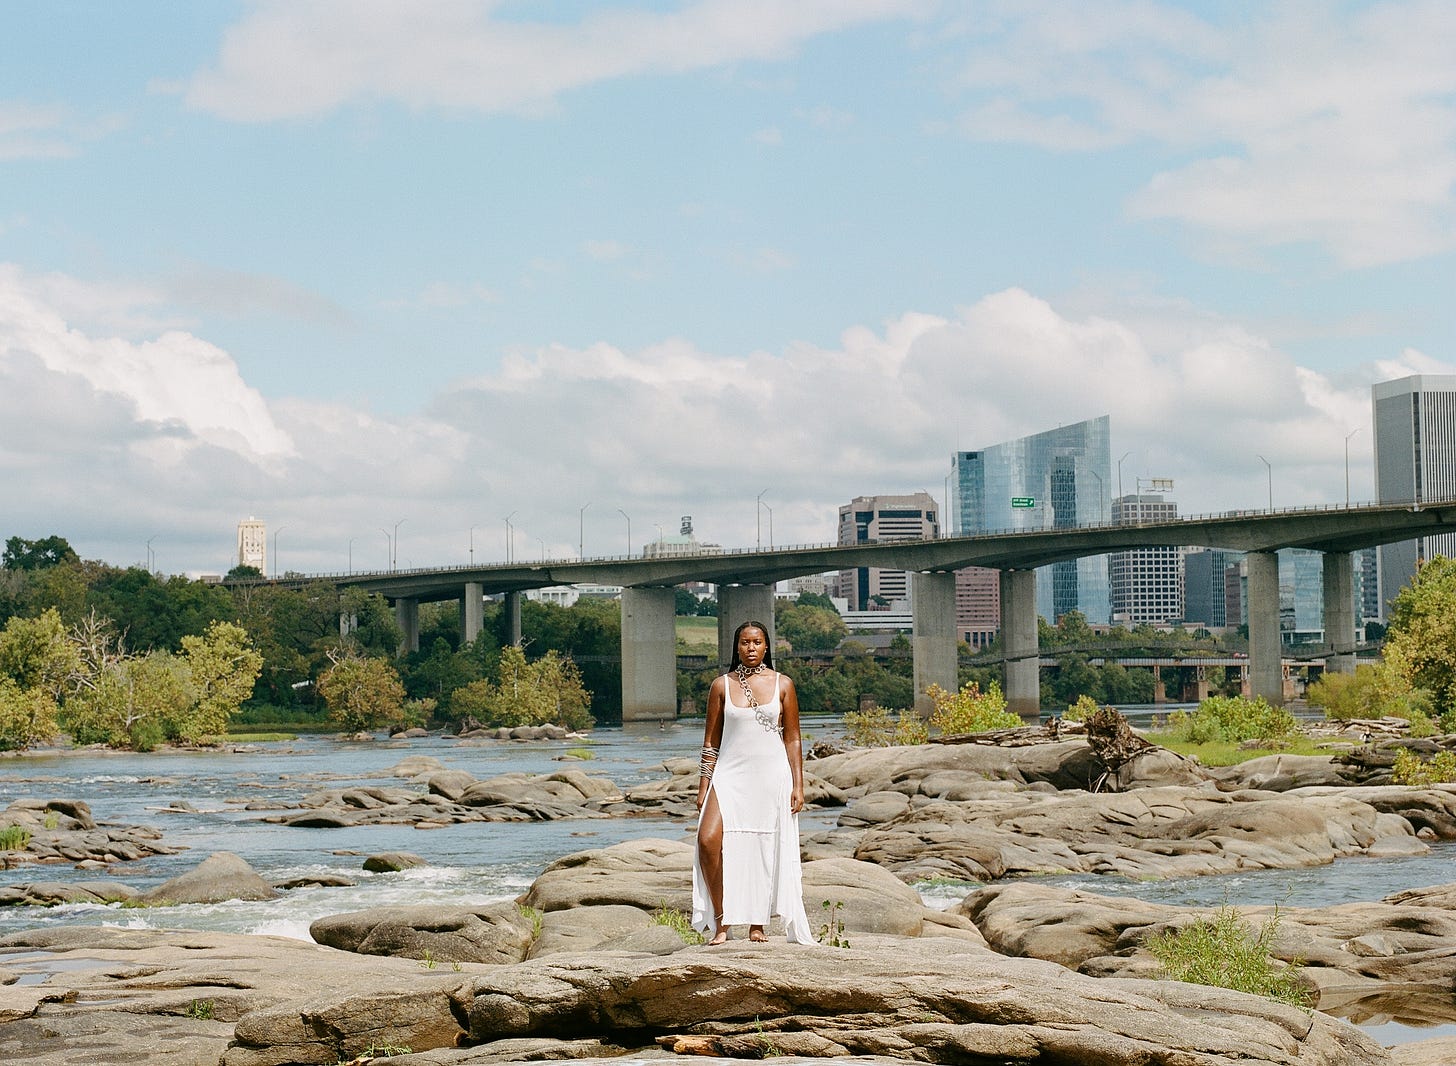 A black woman (me) with braids wearing a white dress looking into the camera while standing on top of river rocks with the city line in the background.